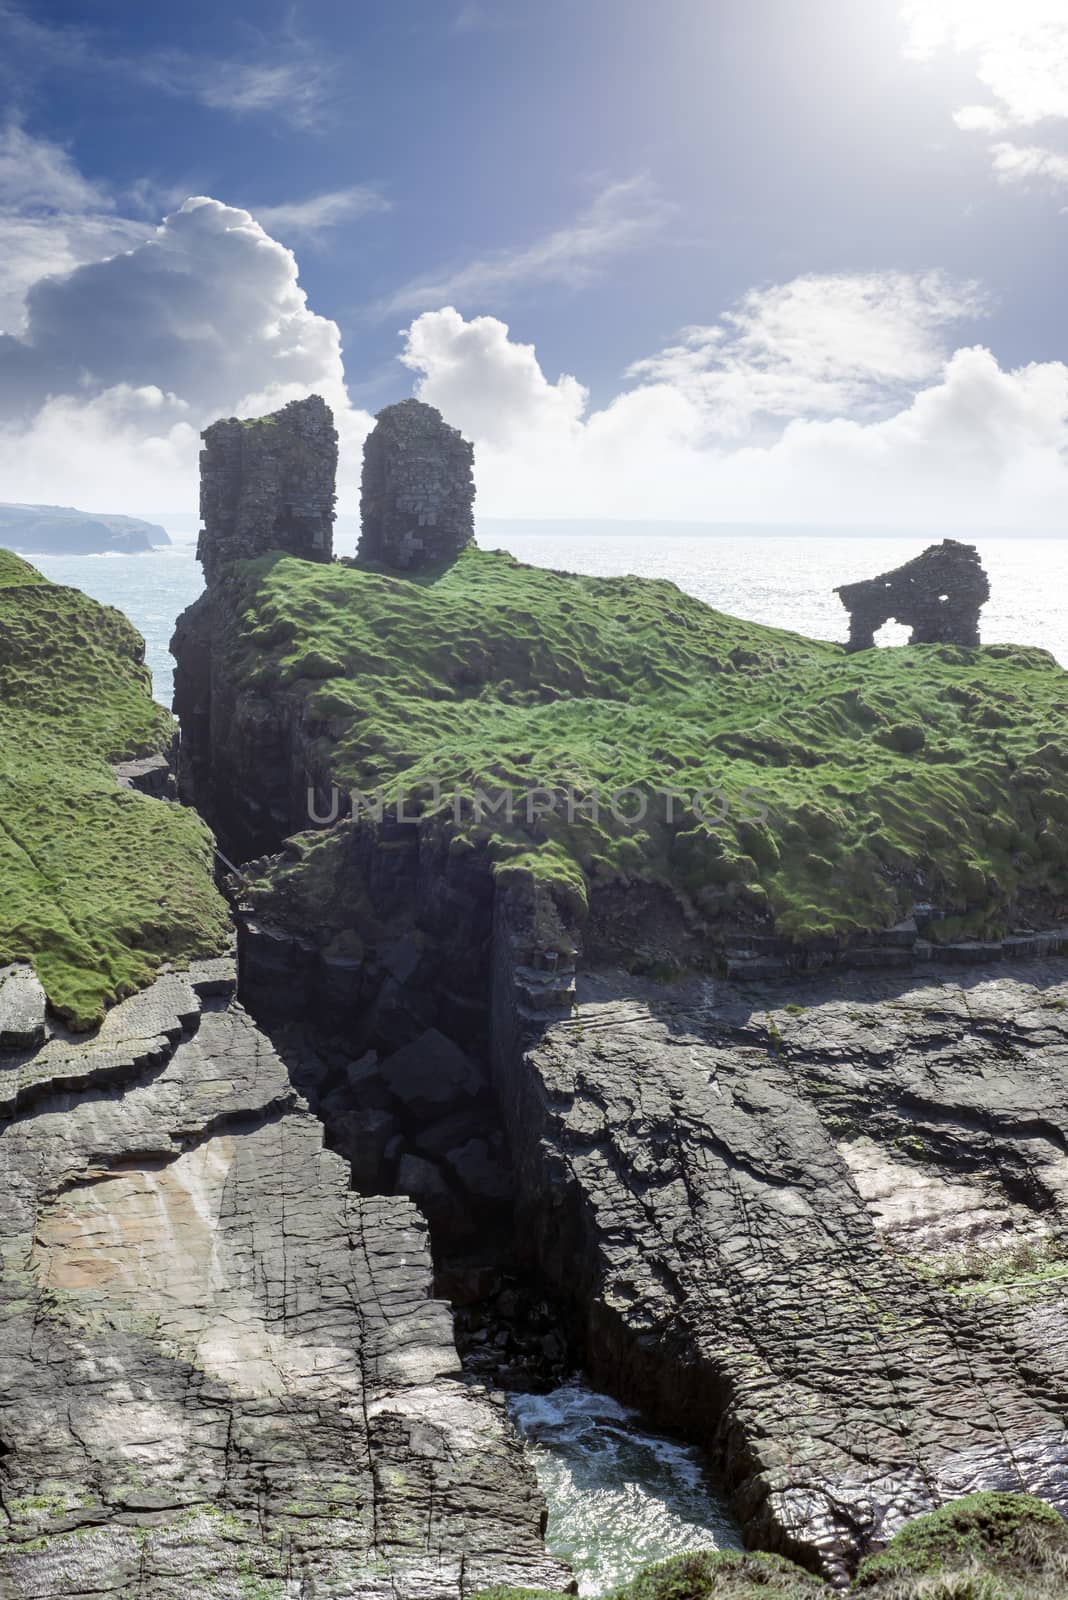 lick castle in county kerry ireland by morrbyte